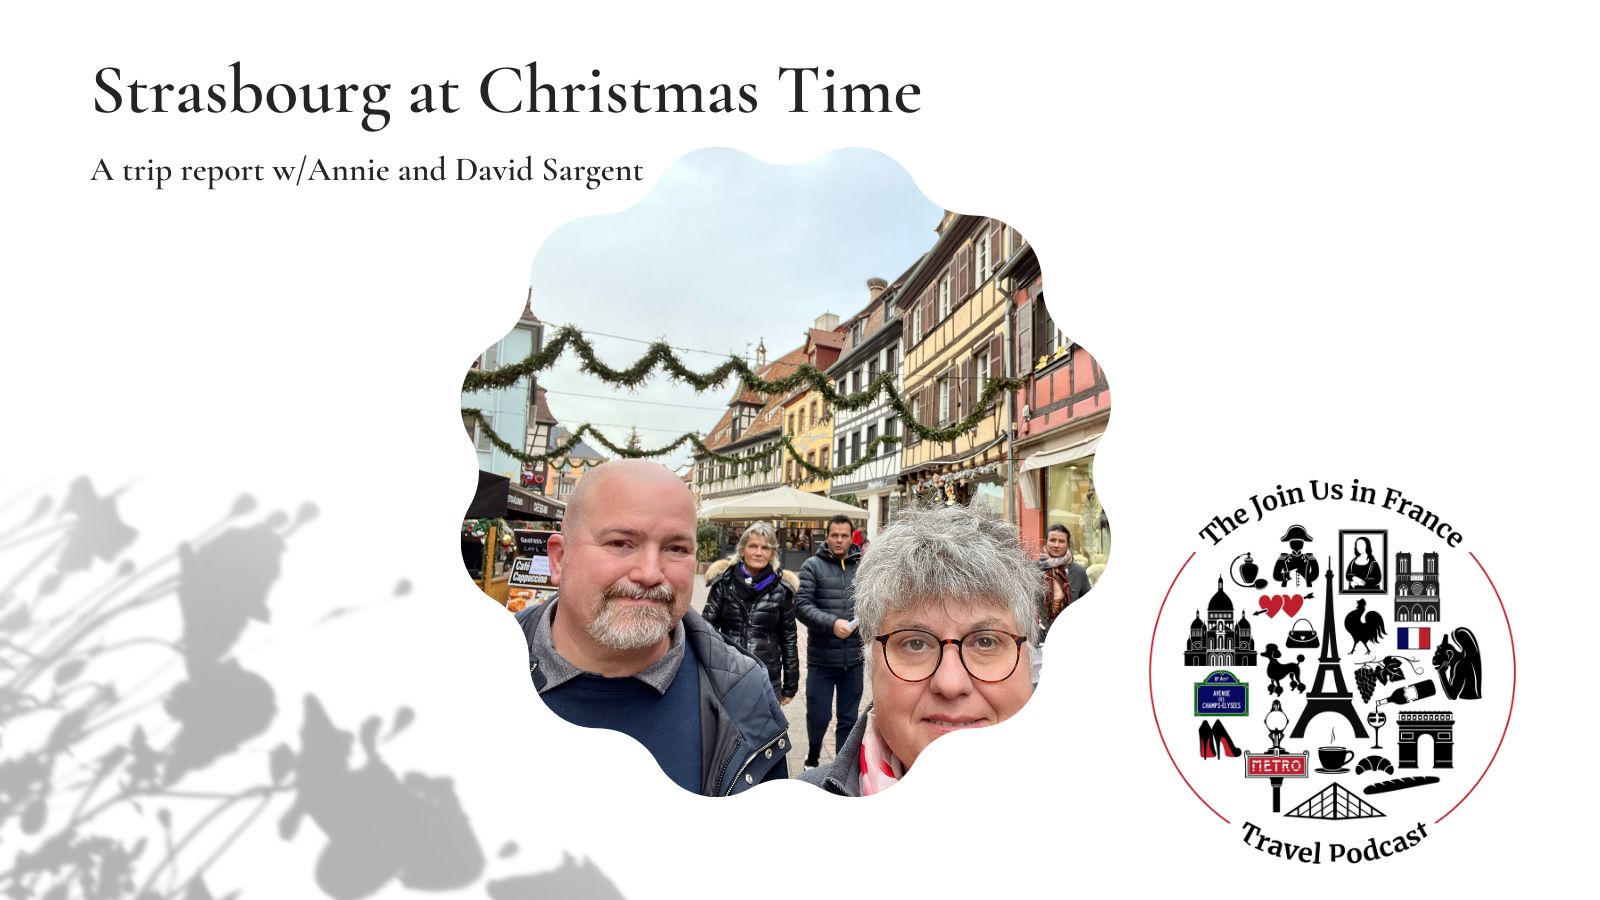 Annie and David Sargent: Strasbourg at Christmas Time episode